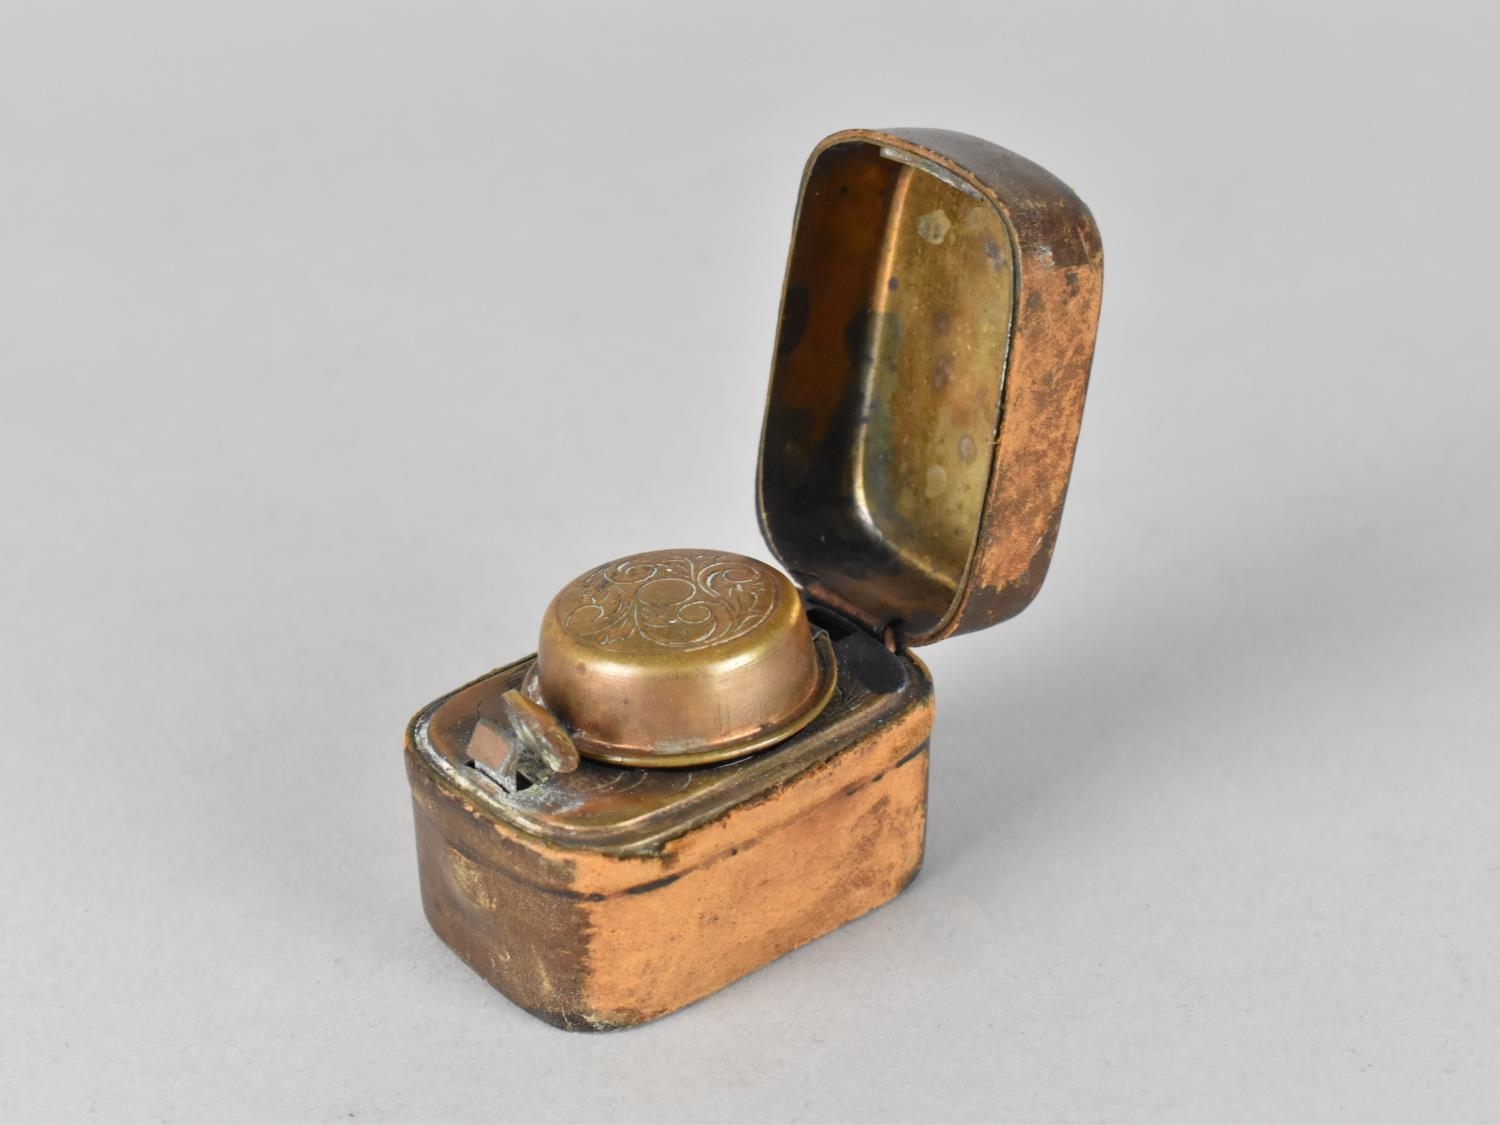 A Late 19th Century Traveling Inkwell with Leather Case, Hinged Lid Inscribed "Ink", 5cms Long - Image 2 of 3